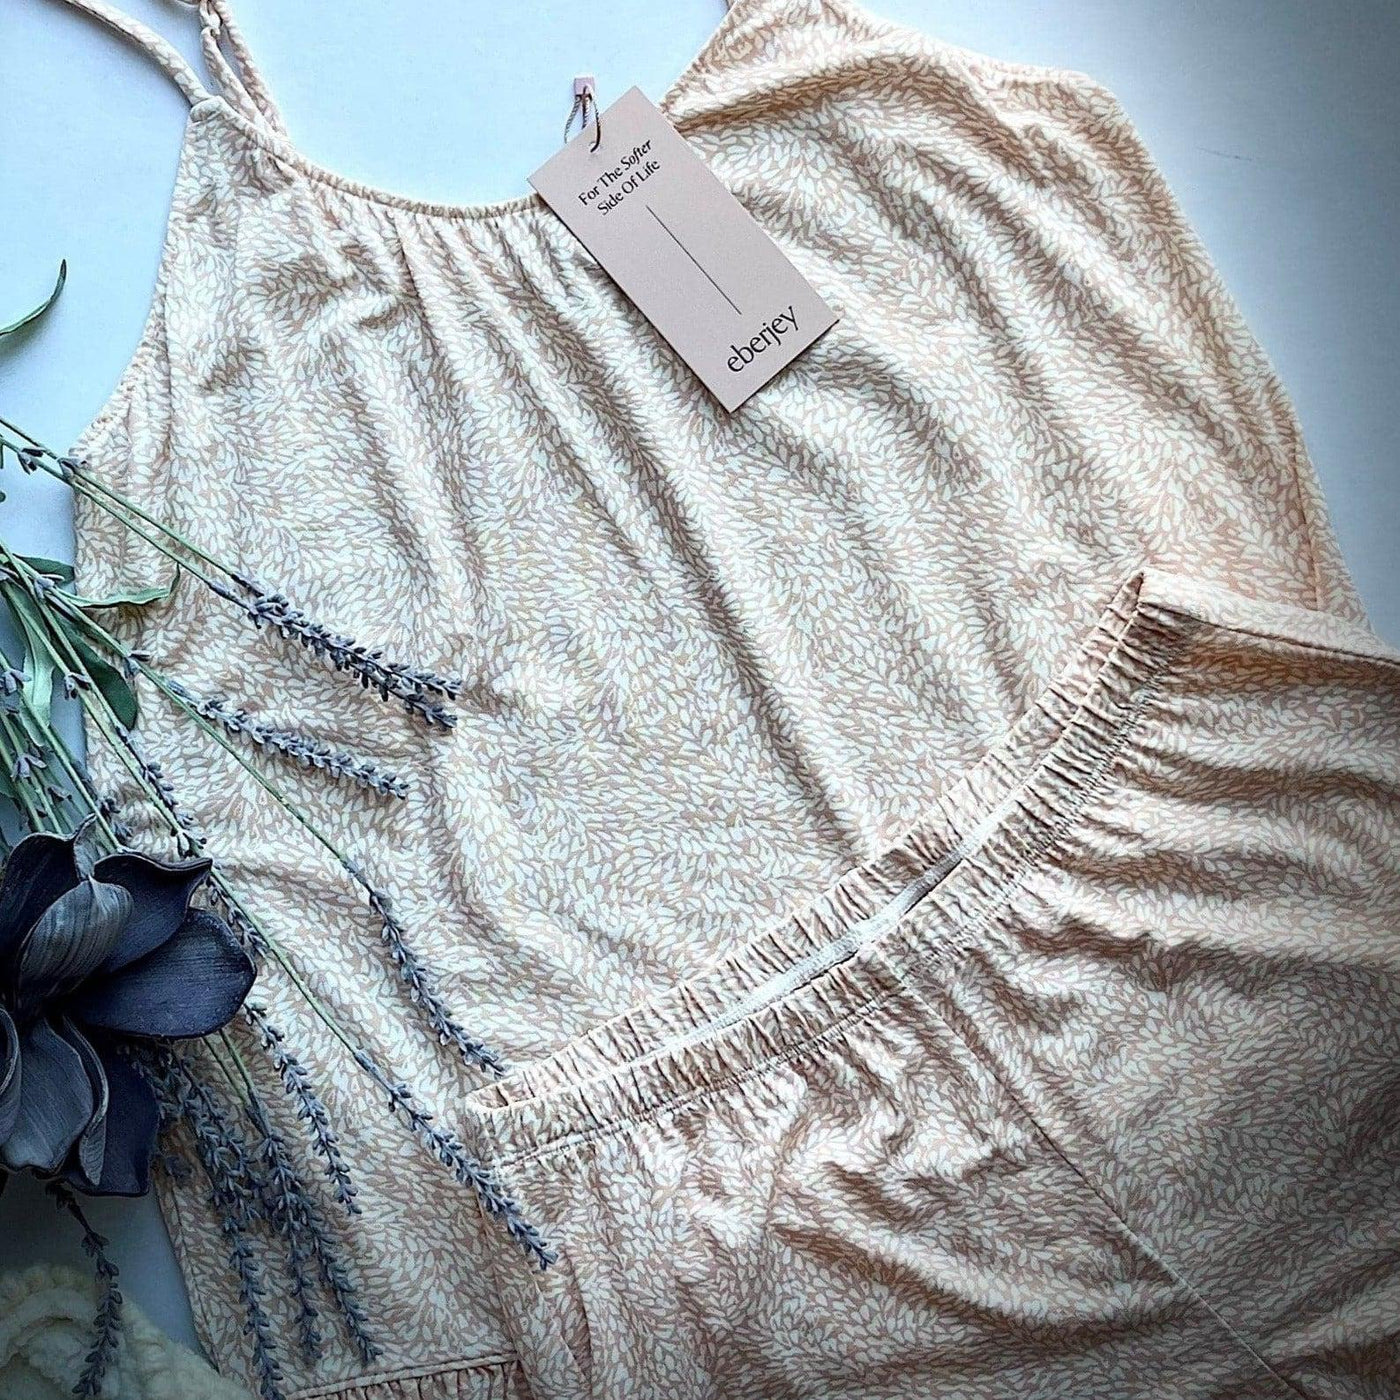 Eberjey Gisele Cami/Short Set CU1141NS in Animale Rose Cloud-Loungewear-Eberjey-Animale Rose Cloud-XSmall-Anna Bella Fine Lingerie, Reveal Your Most Gorgeous Self!